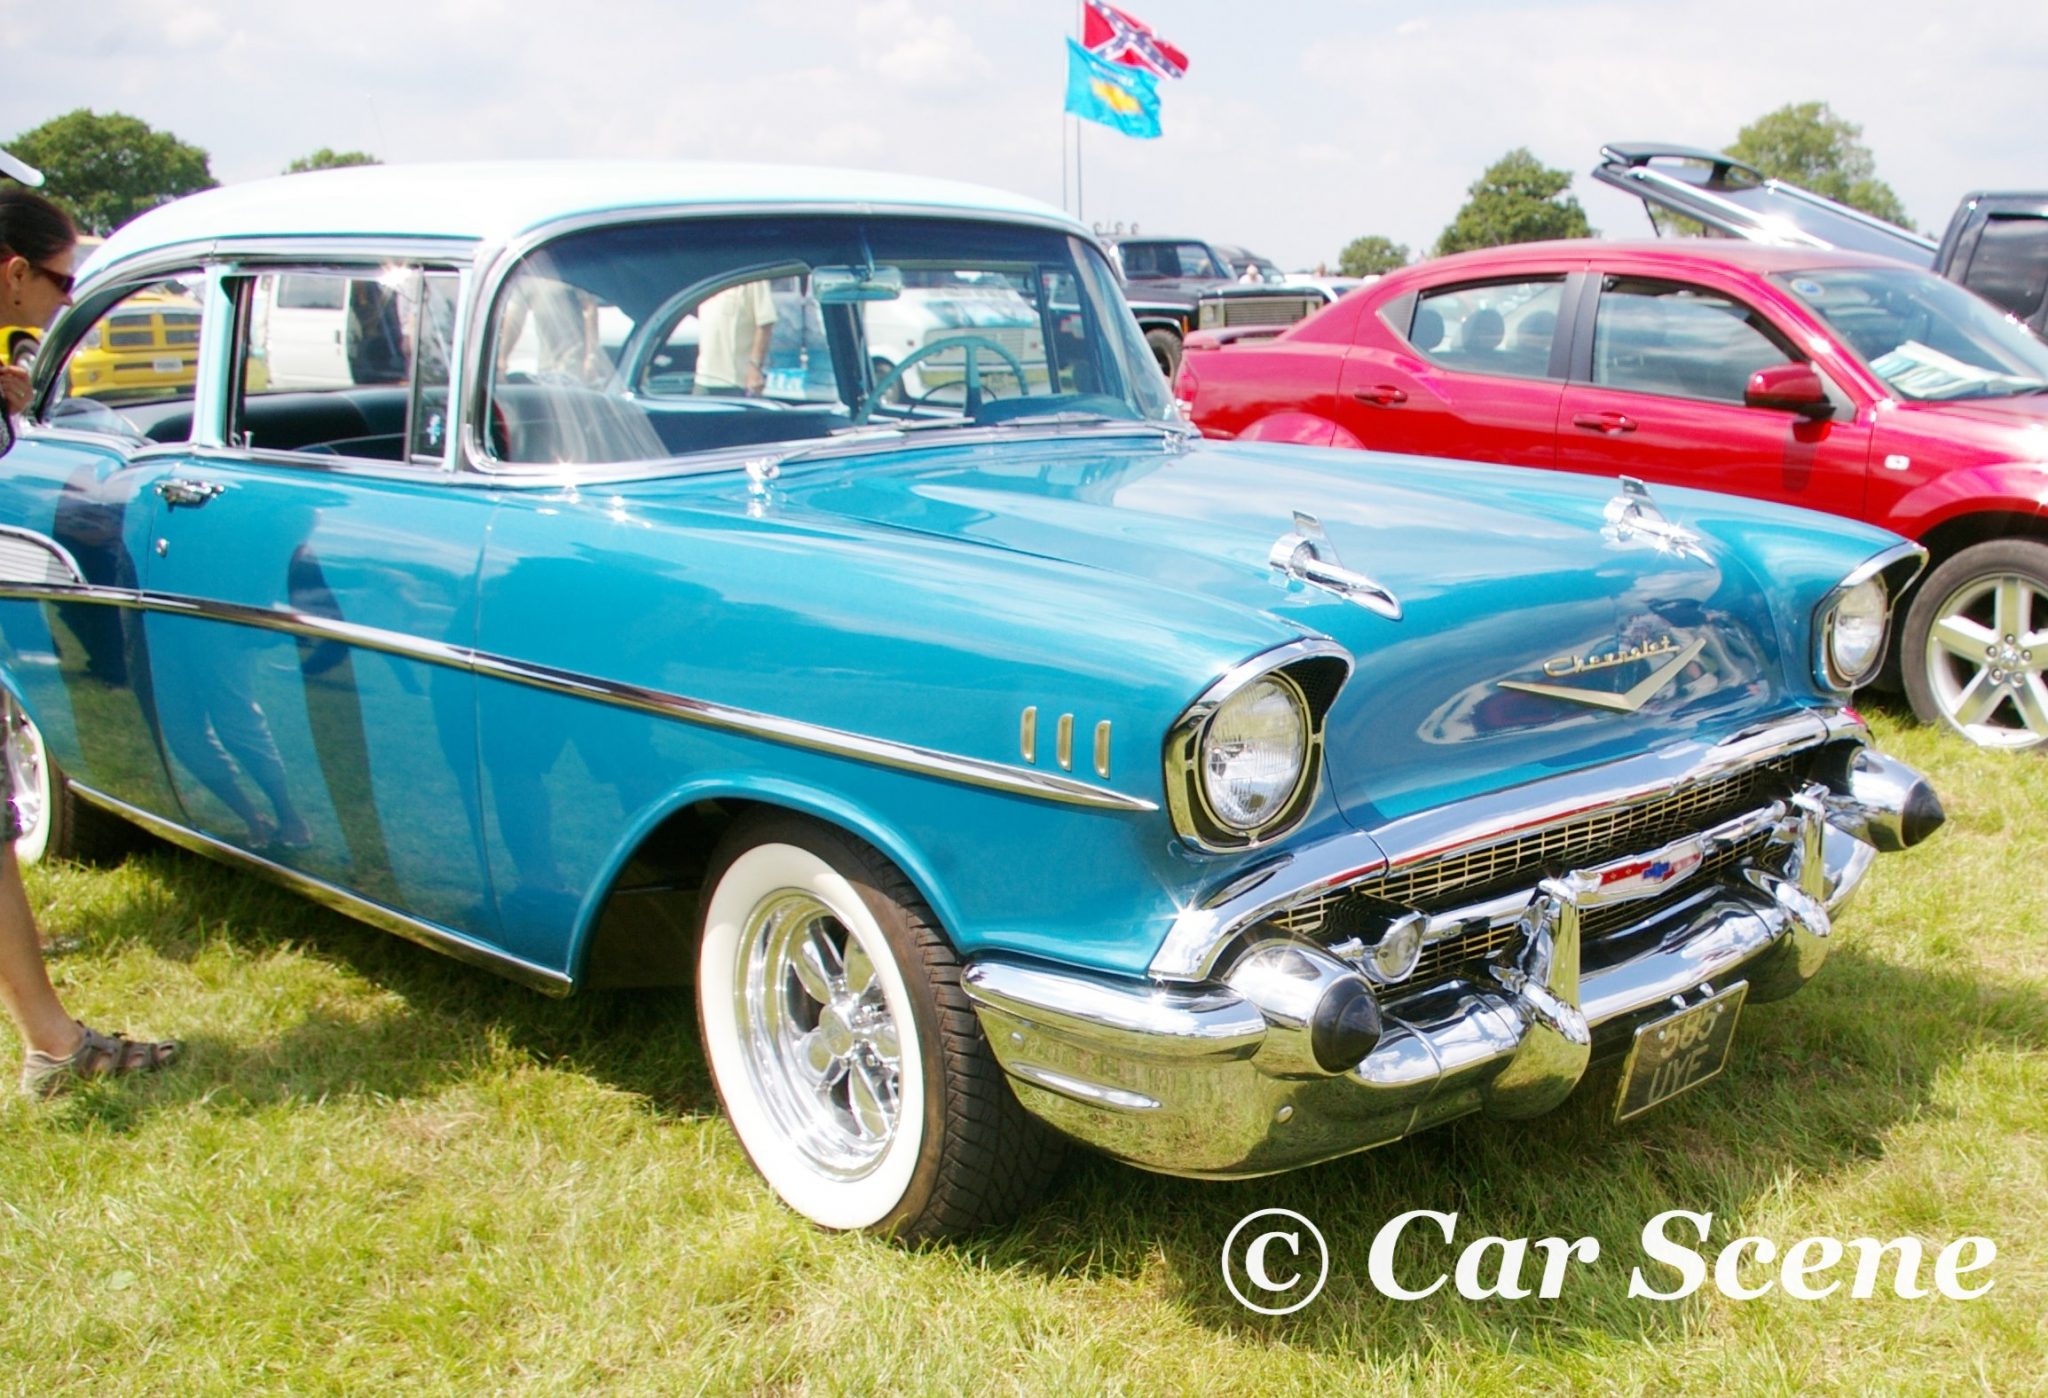 1957 Chevrolet Bel Air Coupe front three quarters view